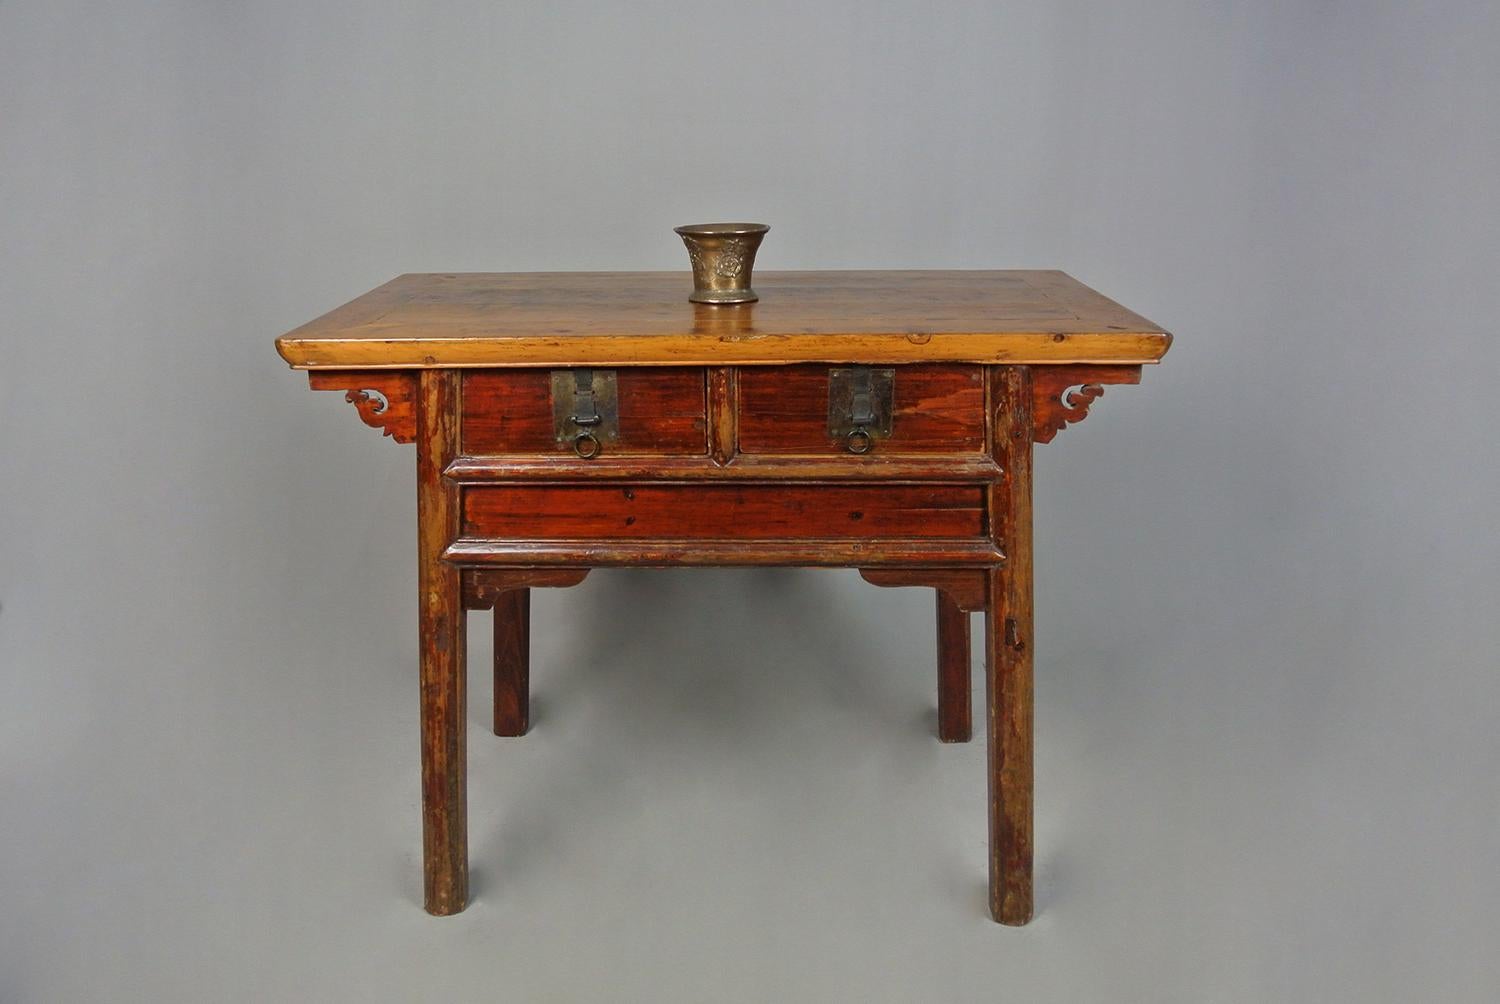 Original Chinese Elm and Bronze Lowboy Altar Table c. 1830 In Good Condition For Sale In Heathfield, GB